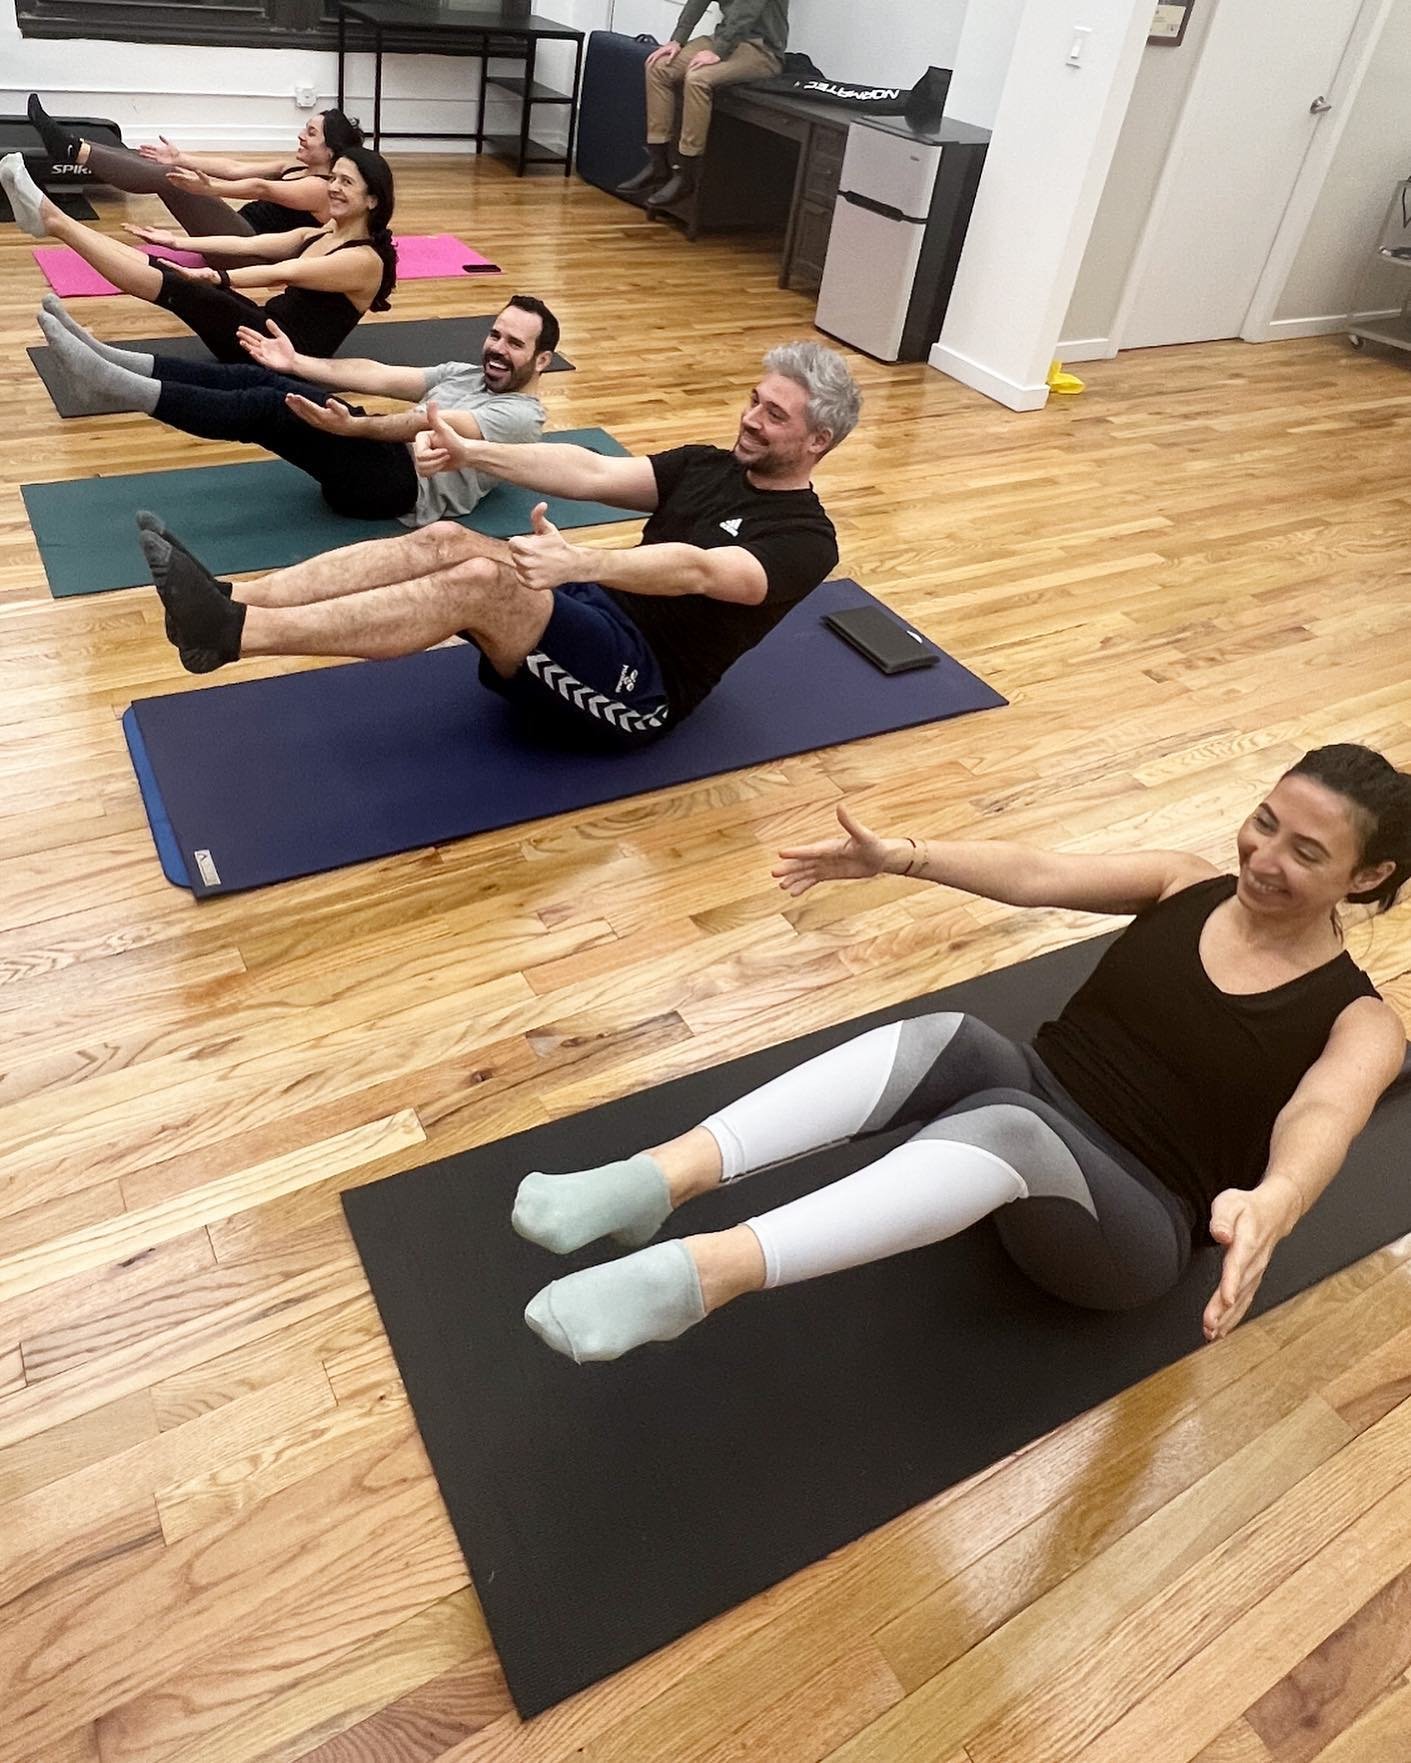 Pre-dinner mat class for this awesome crew &mdash; we had so much fun we almost forgot how much our abs hurt!🔥✨

#romanaspilates #classicalpilates #LABpilates #LABpilatesNY #nycpilates #nypilates